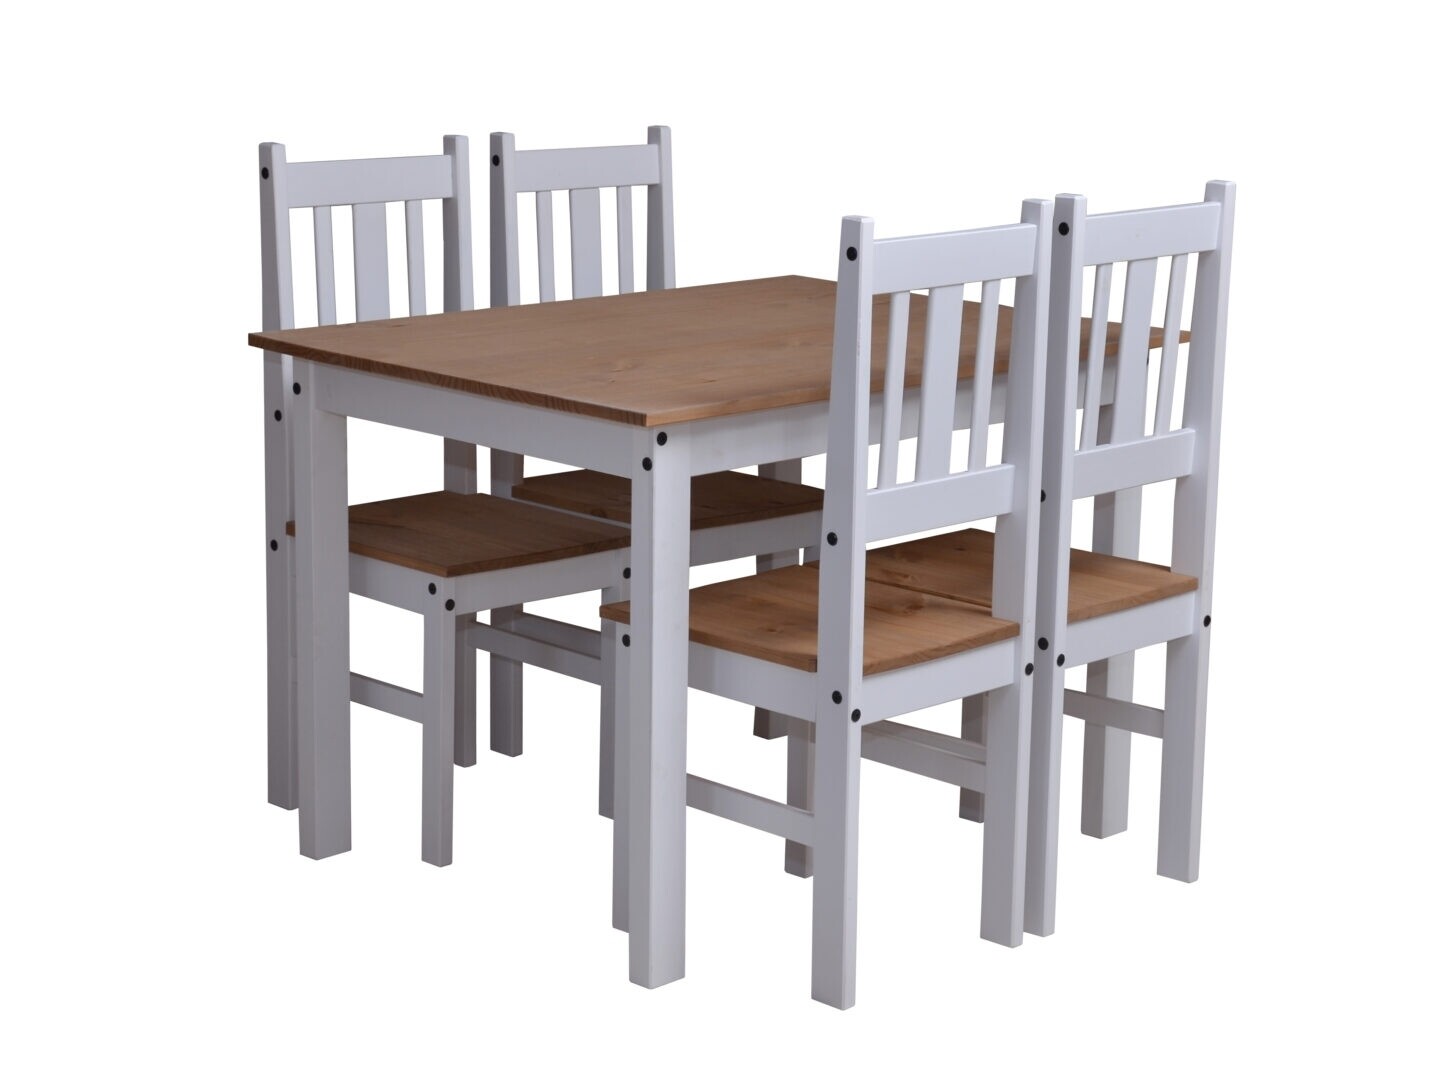 Ellingham dining set incl 4 chairs